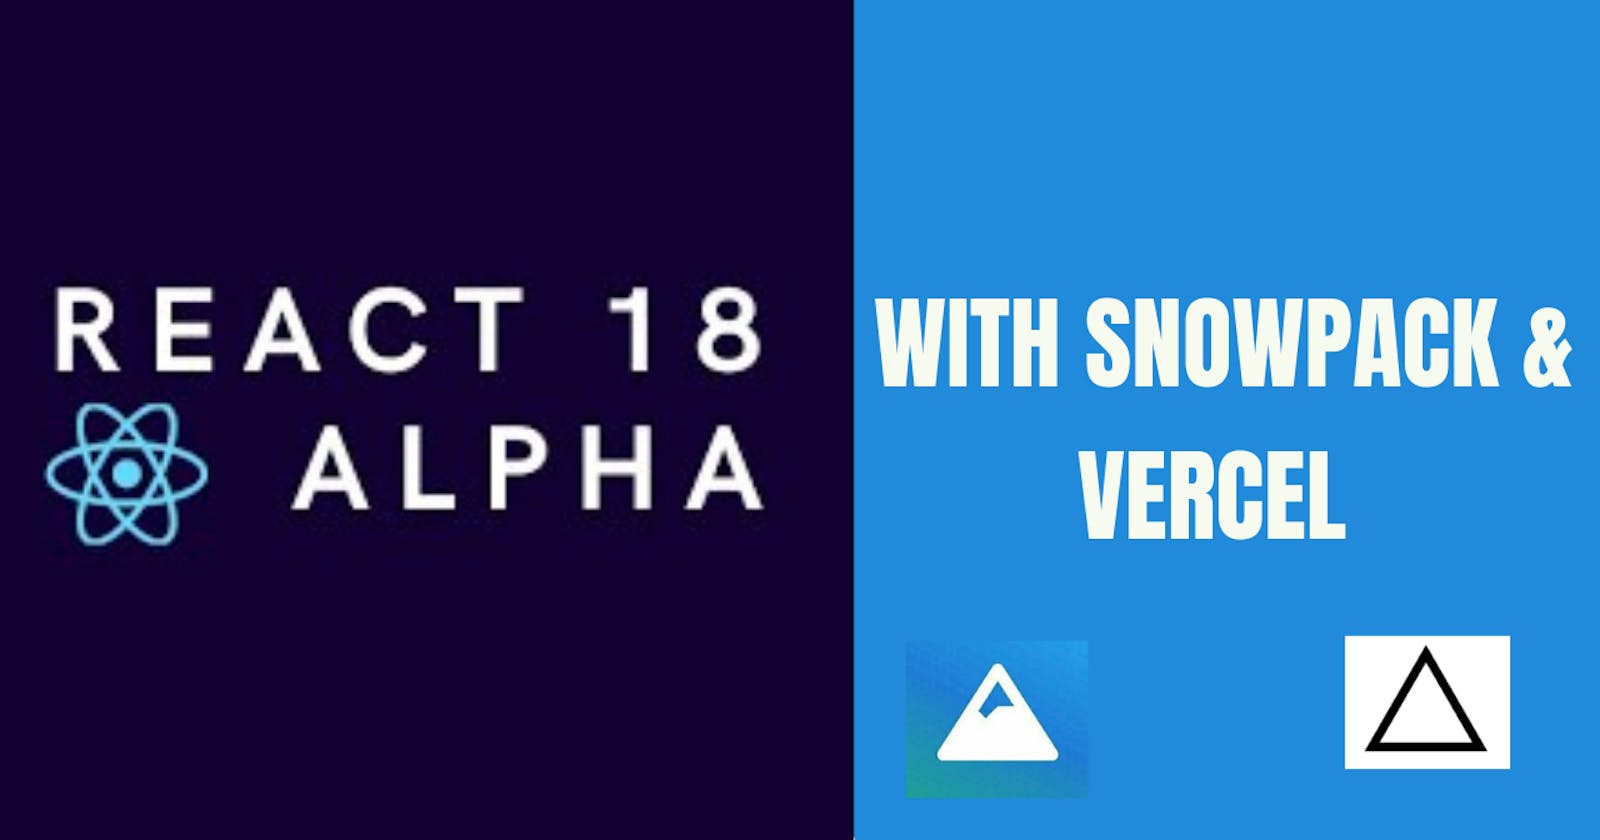 A First Look at How To Set Up React 18 Alpha with Snowpack and Vercel